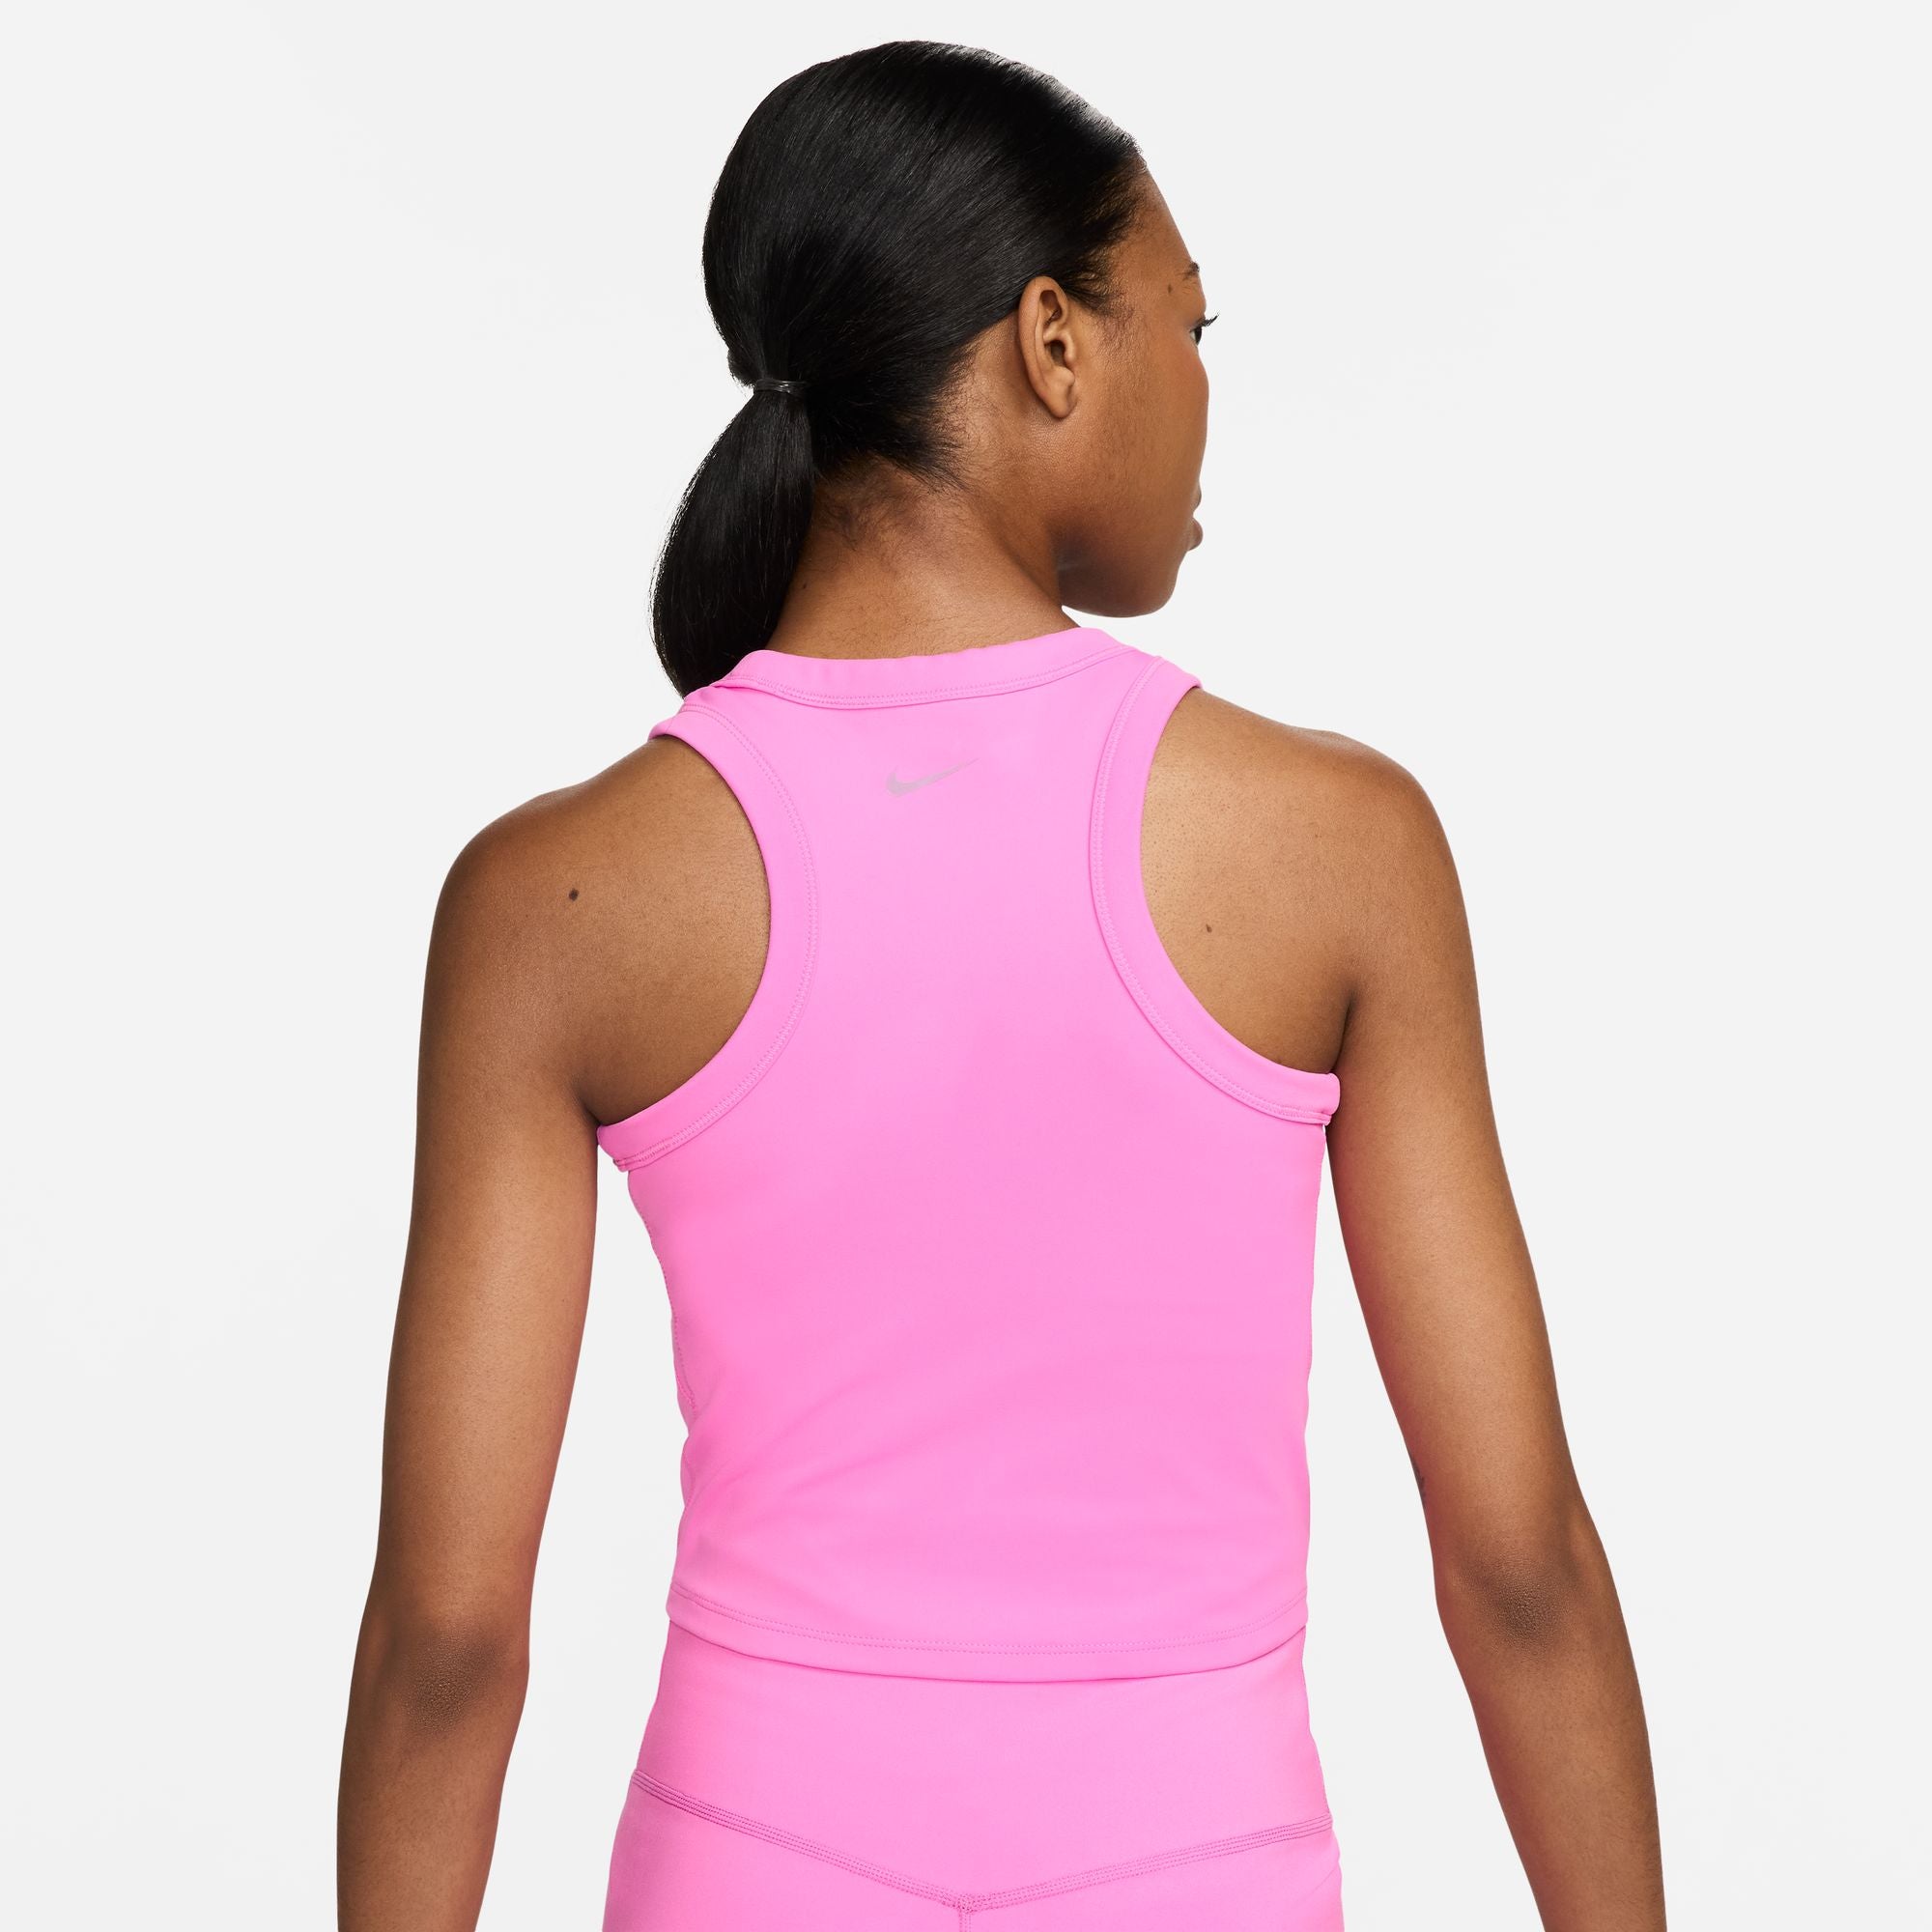 NIKE WOMEN'S ONE FITTED TANK - 675 PLAYFUL PINK/BLACK 